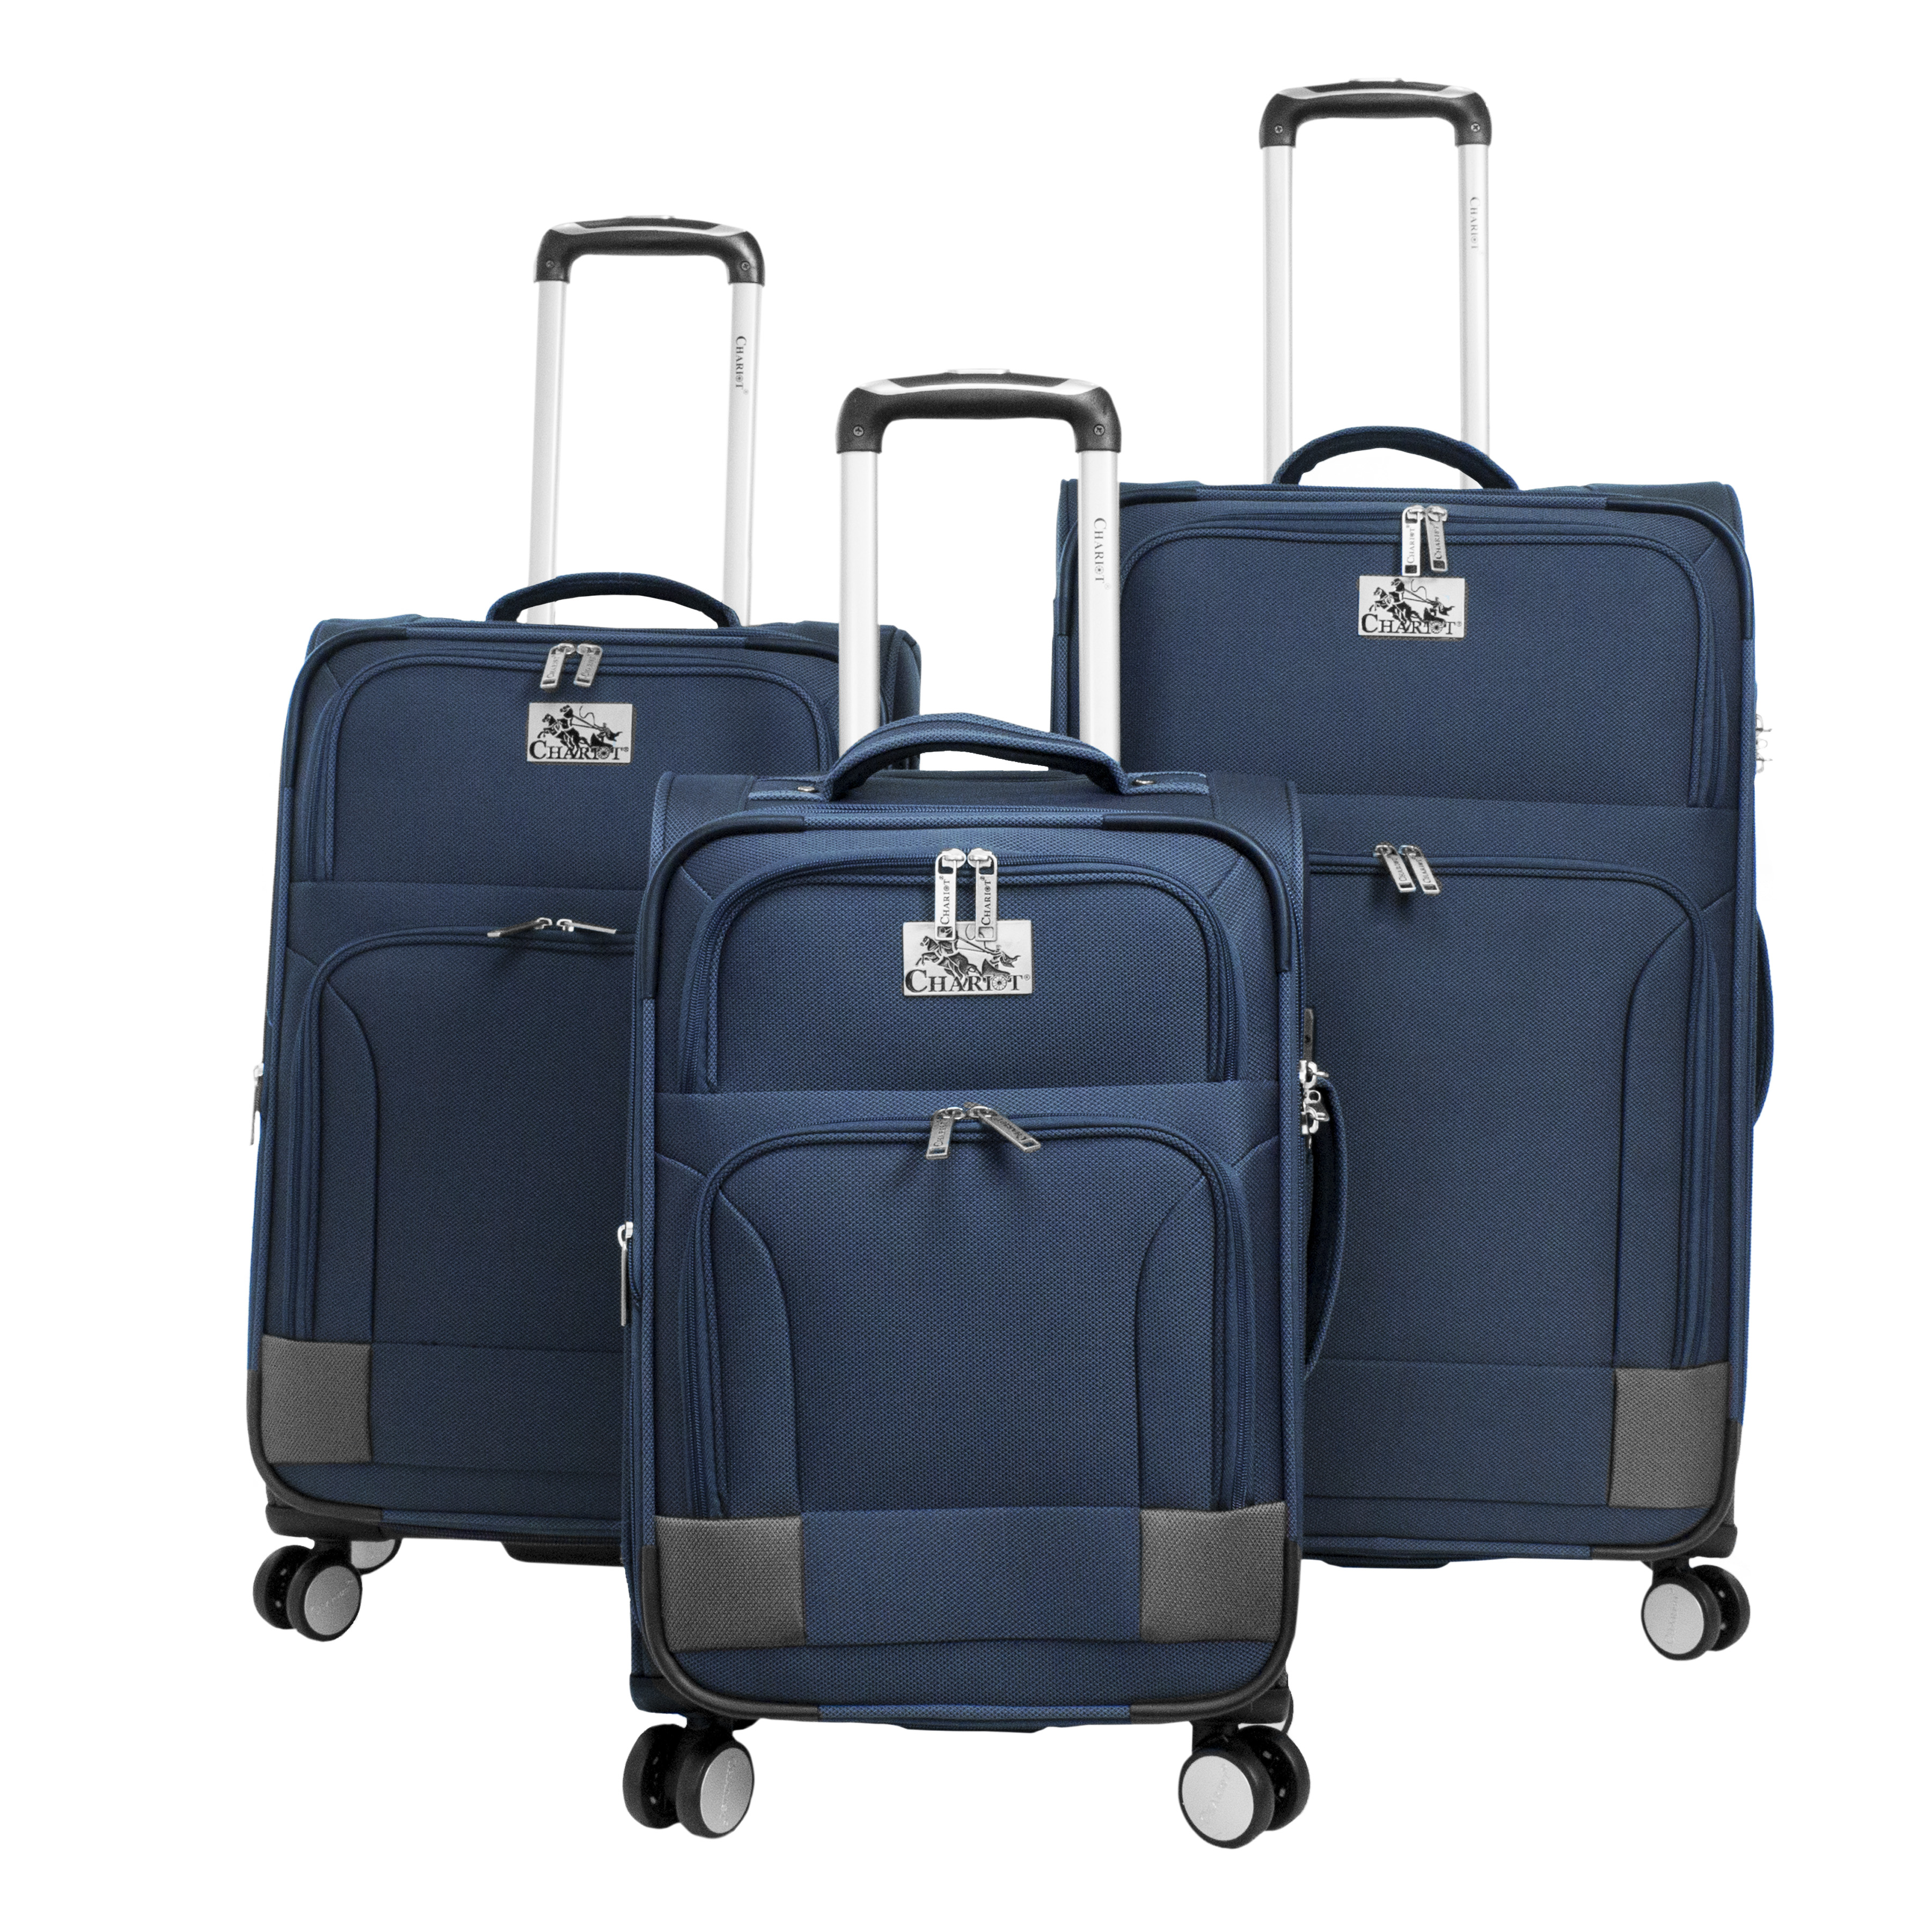 Blue and Grey Soft Case Luggage